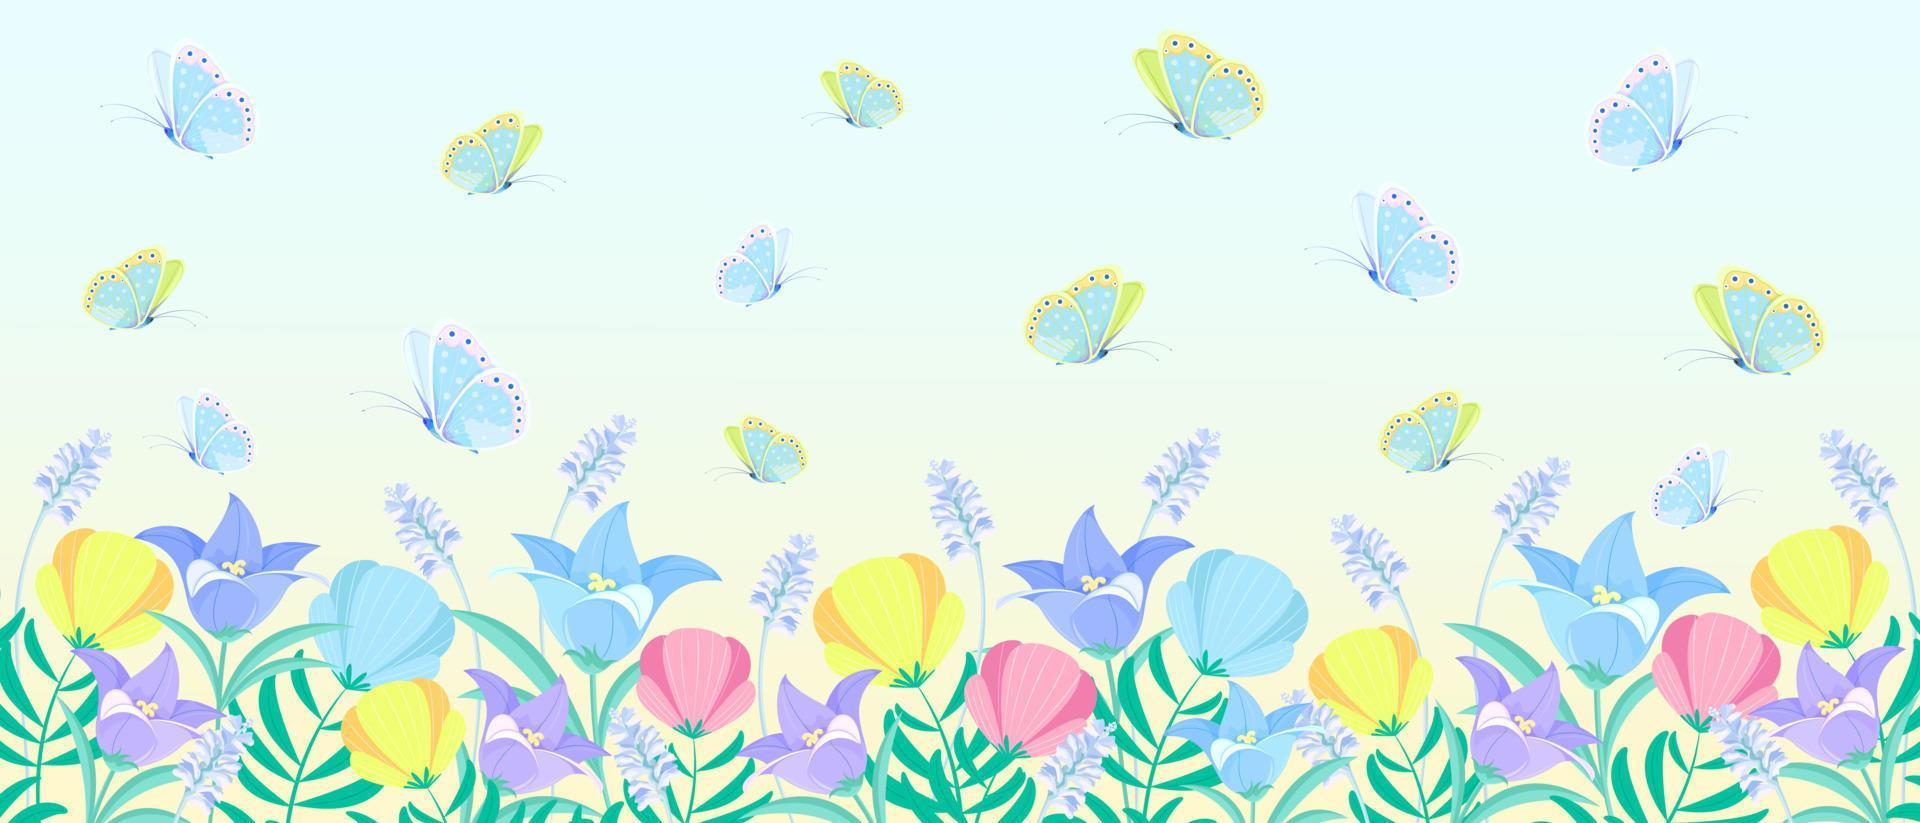 Vector floral pattern with bright wildflowers and flying butterflies. On a soft blue background with a gradient. Panoramic horizontal illustration. Floral background in a fabulous style